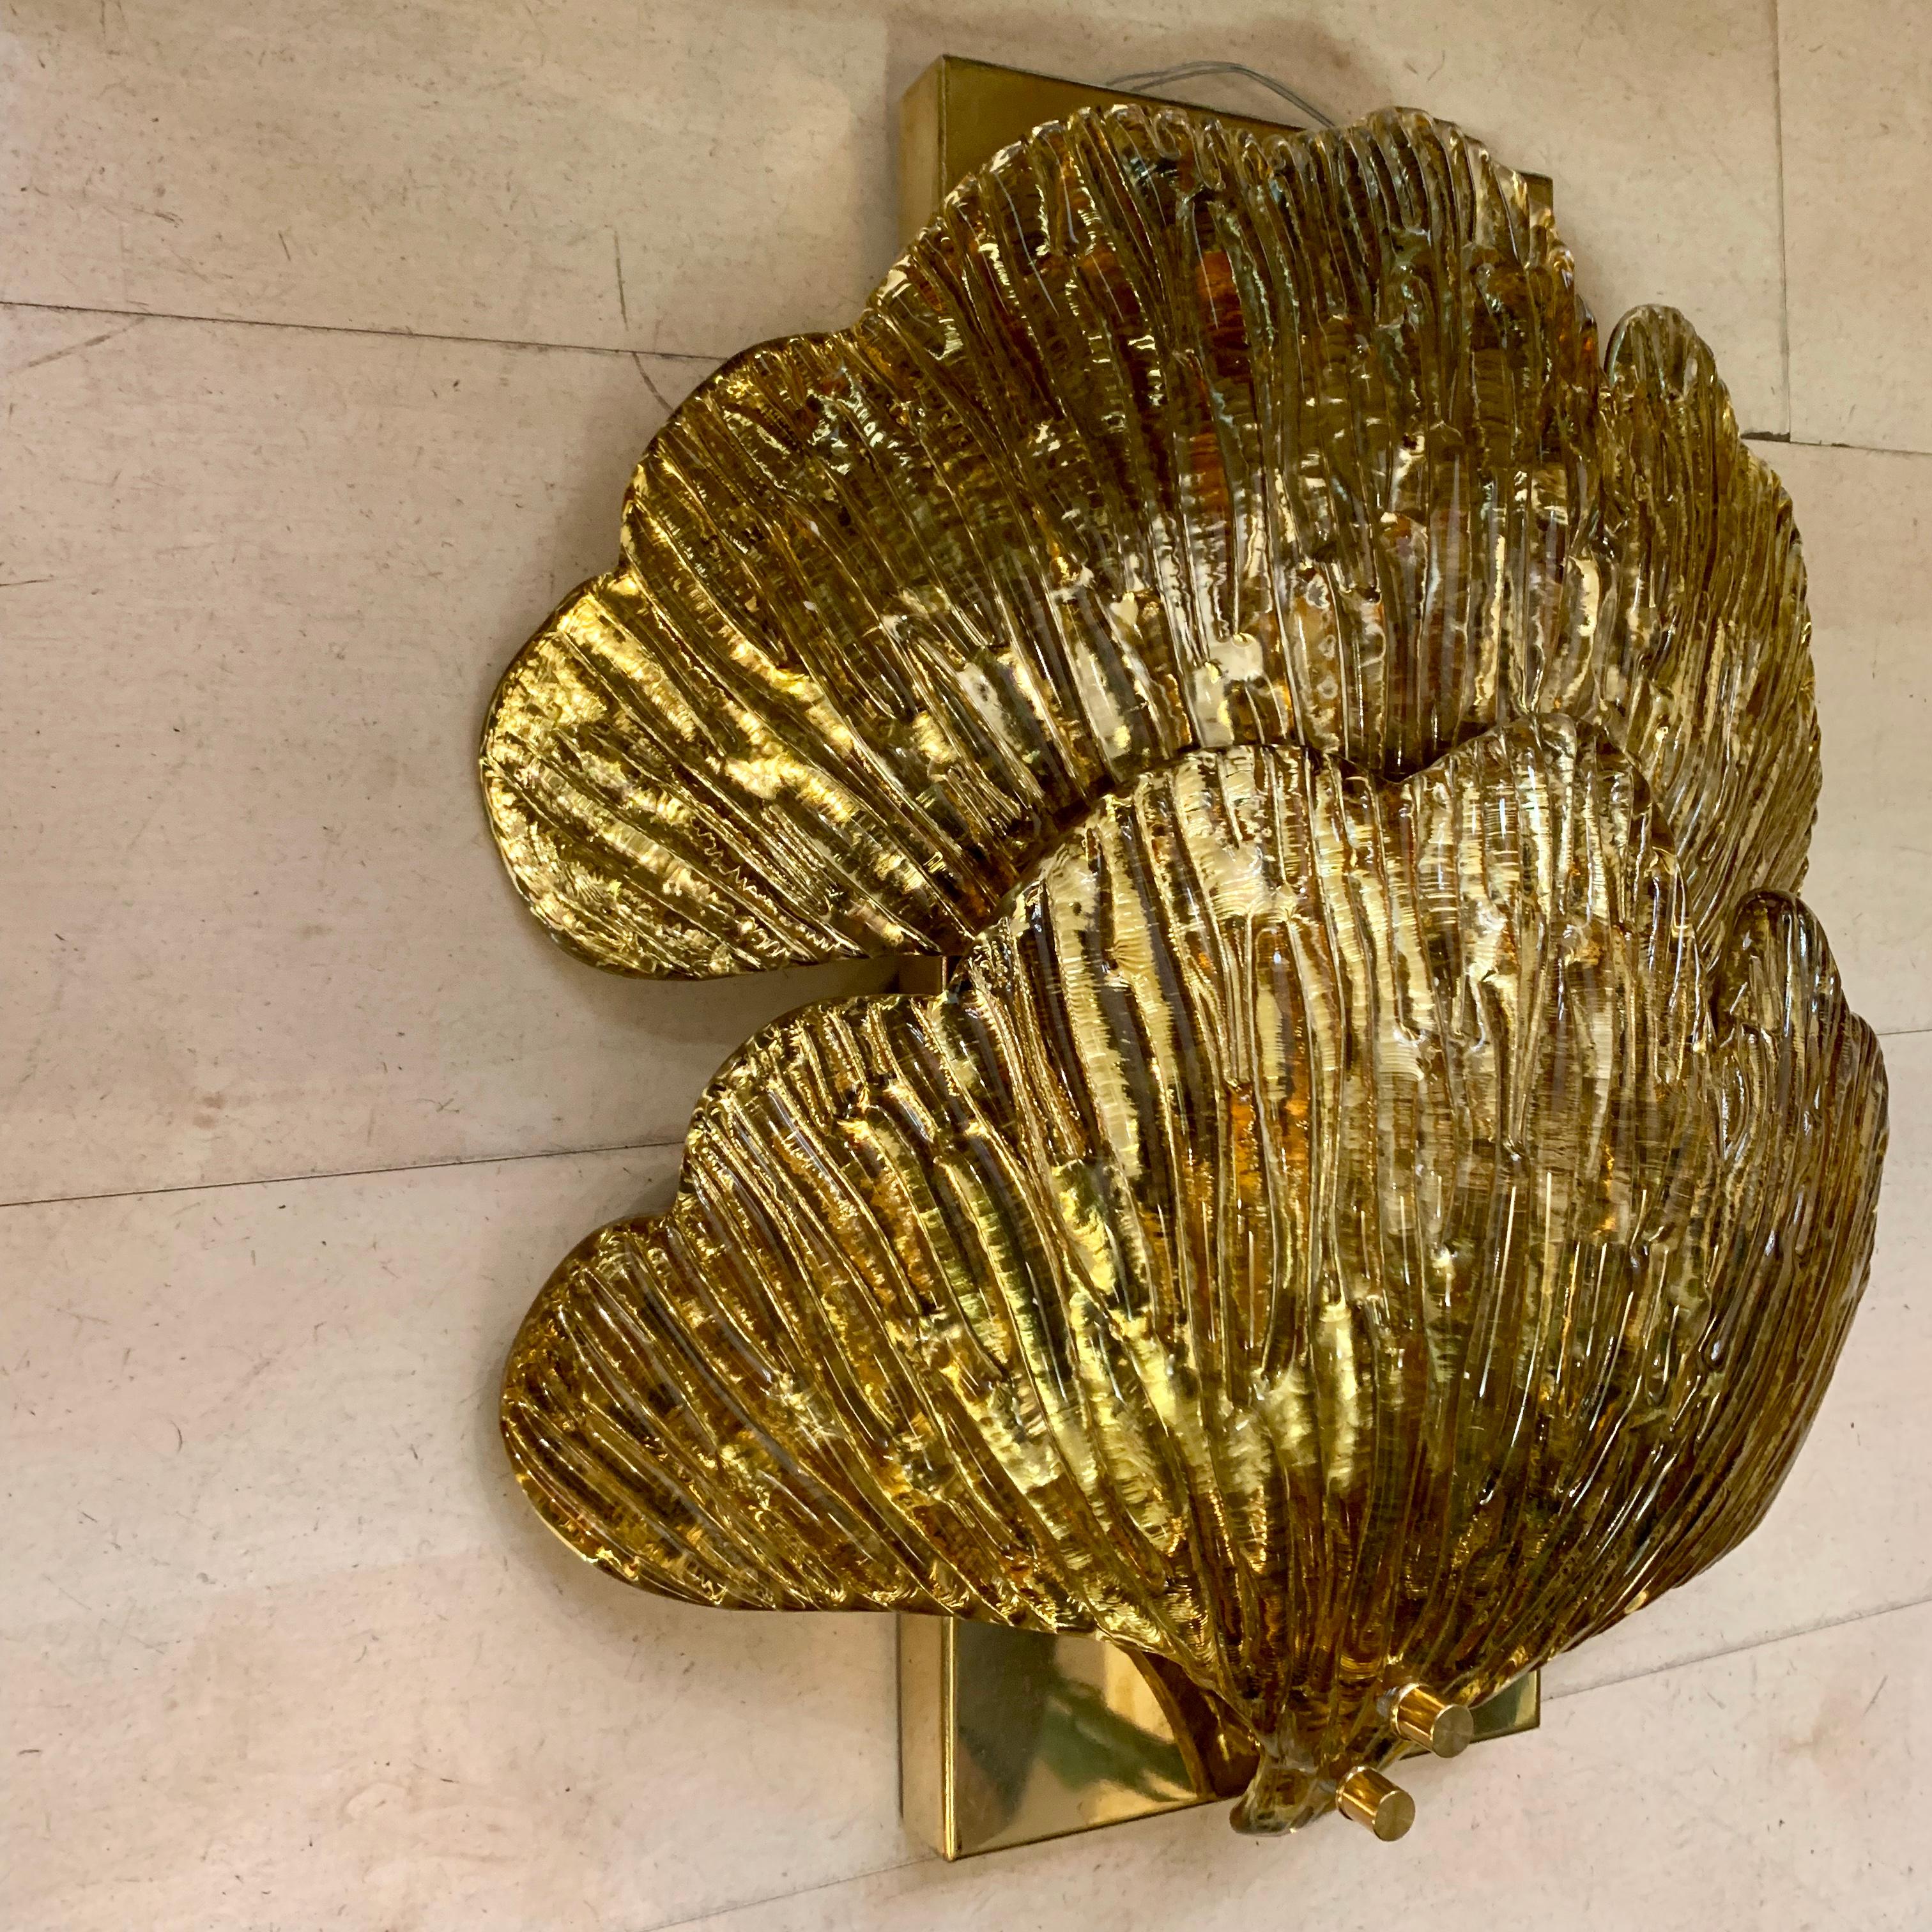 Pair of golden Murano glass mirrored ginkgo leaf sconces.
The structure is in brass and there are 4 bulbs per sconces.
Each applique is composed of two gilded ginkgo leaves in mirrored hand blown Murano glass.